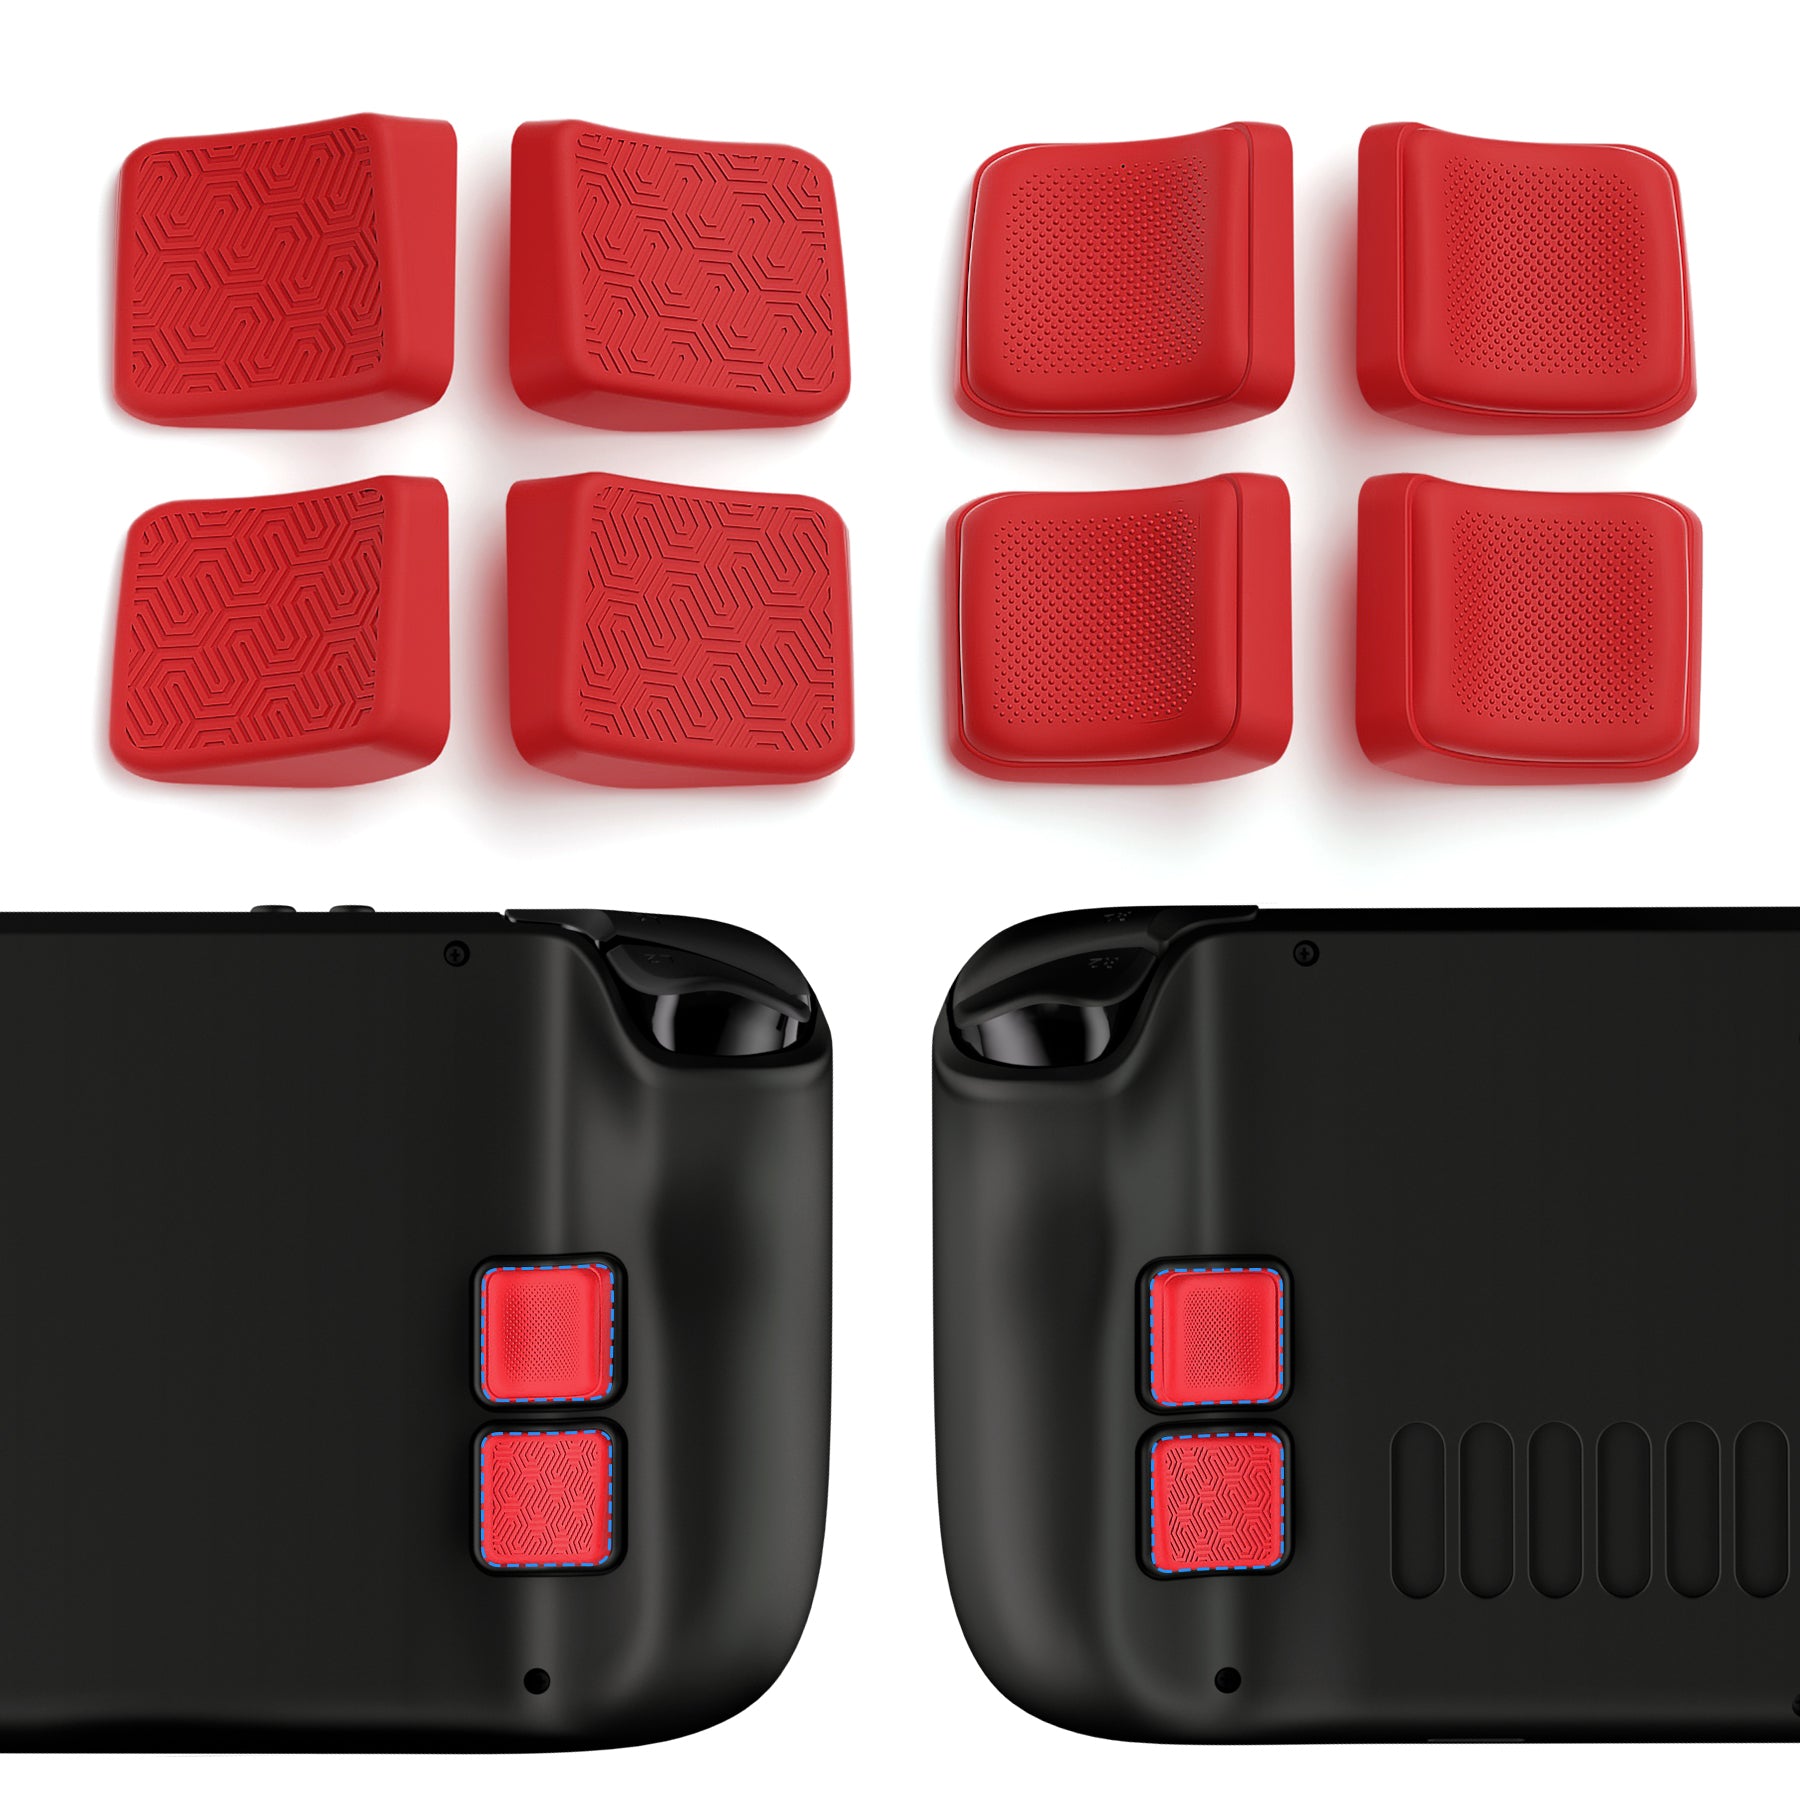 PlayVital Mix Version Back Button Enhancement Set for Steam Deck LCD, Grip Improvement Button Protection Kit for Steam Deck OLED - Streamlined & Studded Design - Red - PGSDM011 playvital